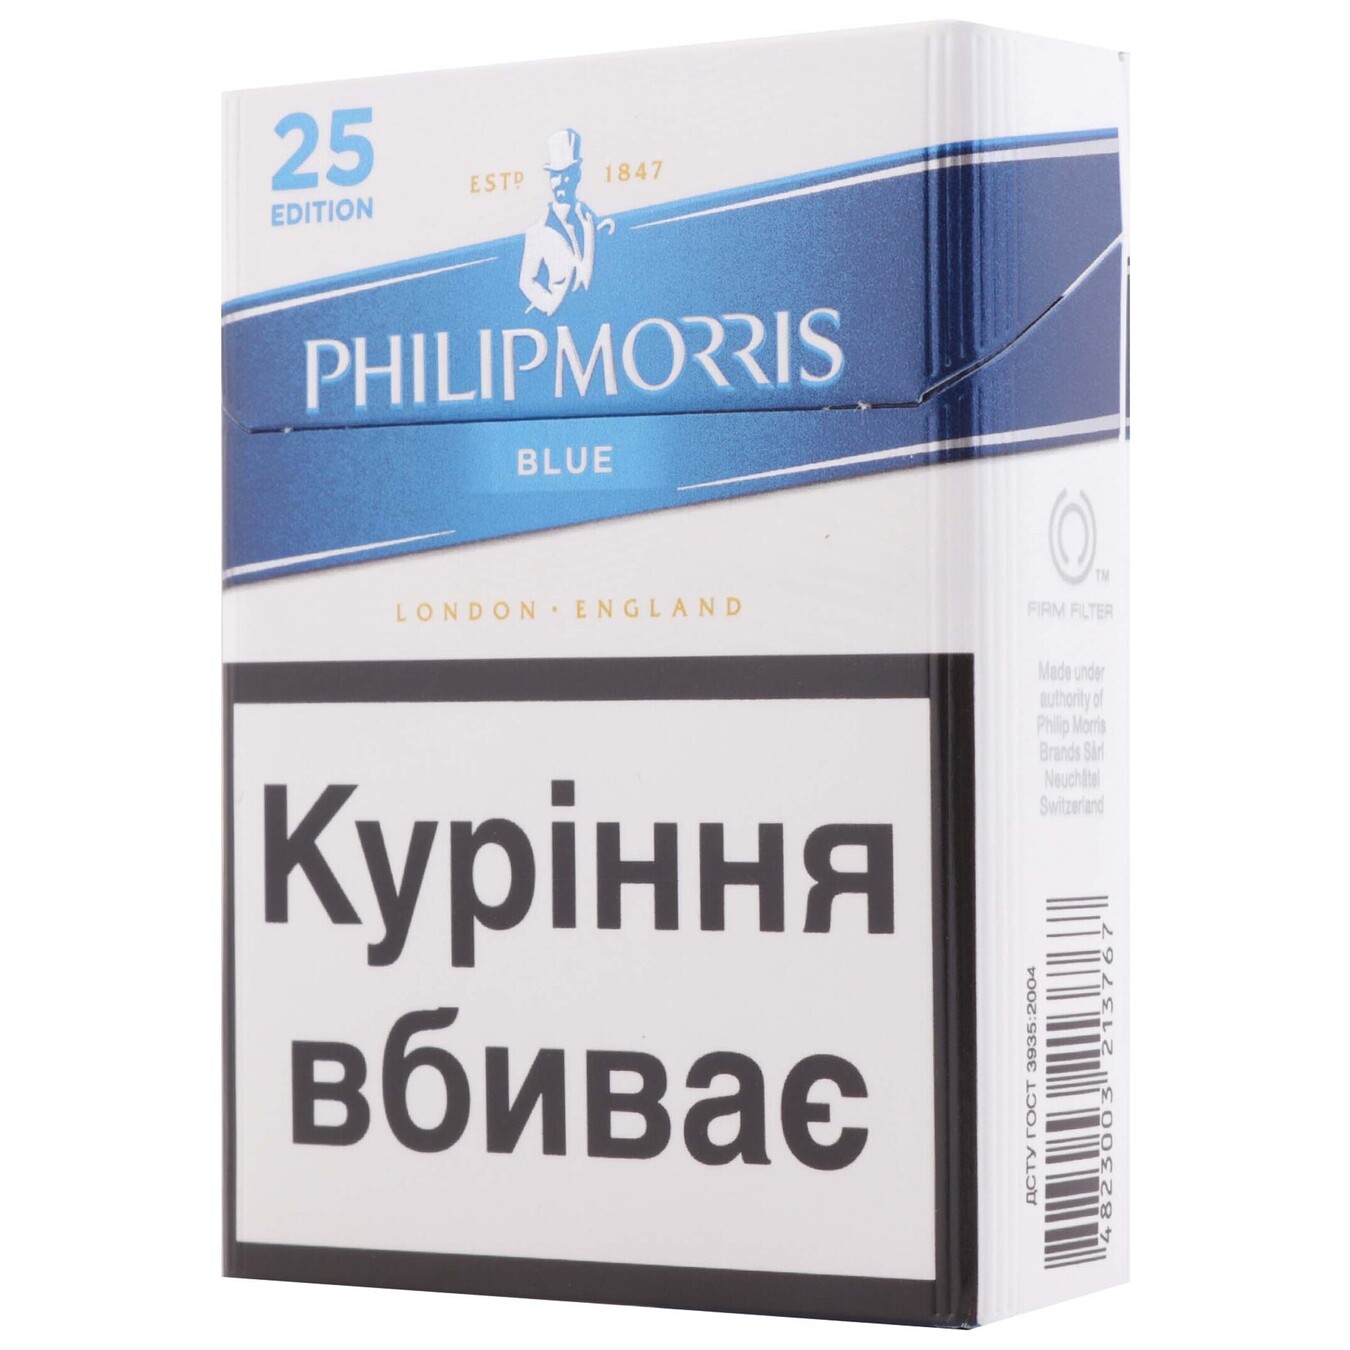 Philip Morris Blue Cigarettes 25 Edition 25pcs (the price is indicated without excise tax) 2